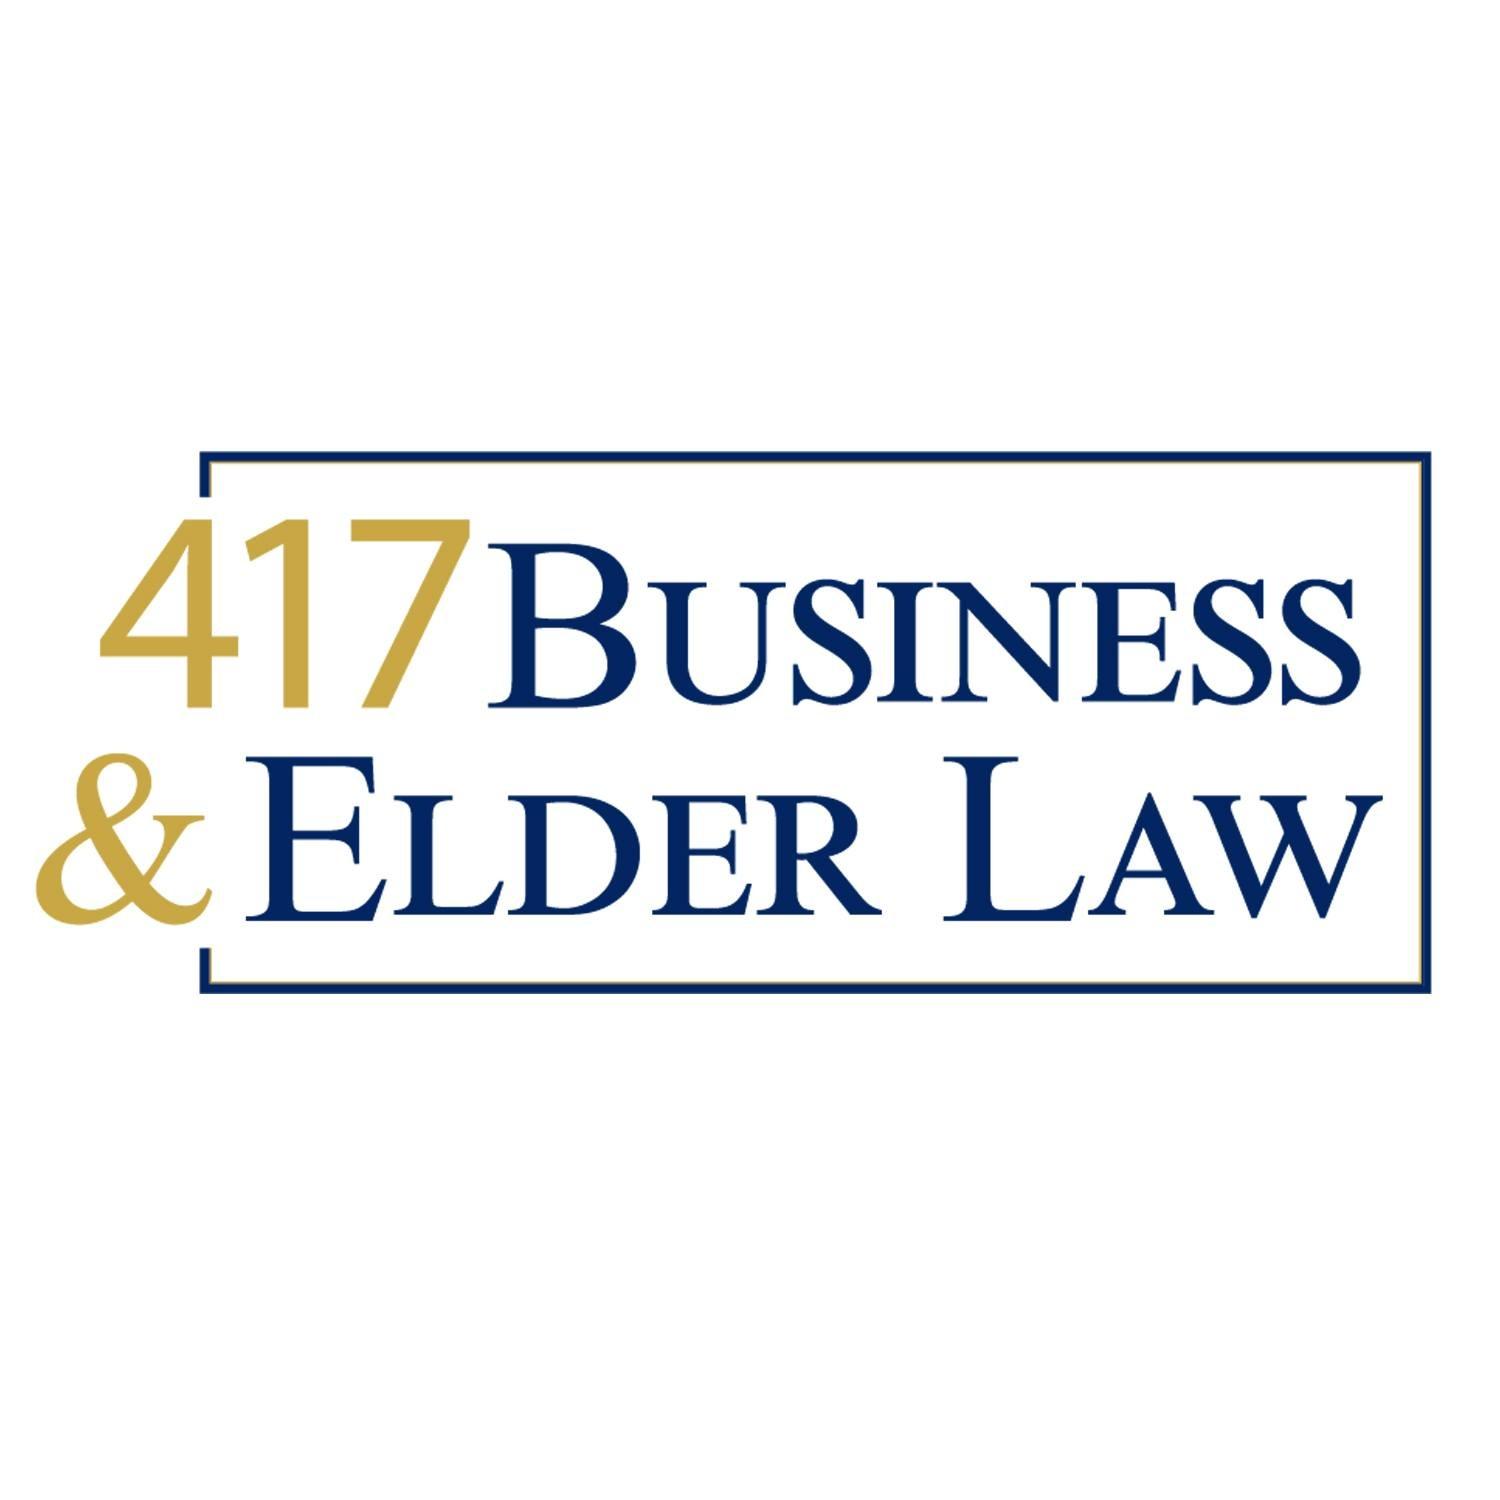 417 Business & Elder Law, LLC formerly known as Law Office of Sativa Boatman-Sloan, LLC - Springfield, MO 65810 - (417)887-4170 | ShowMeLocal.com